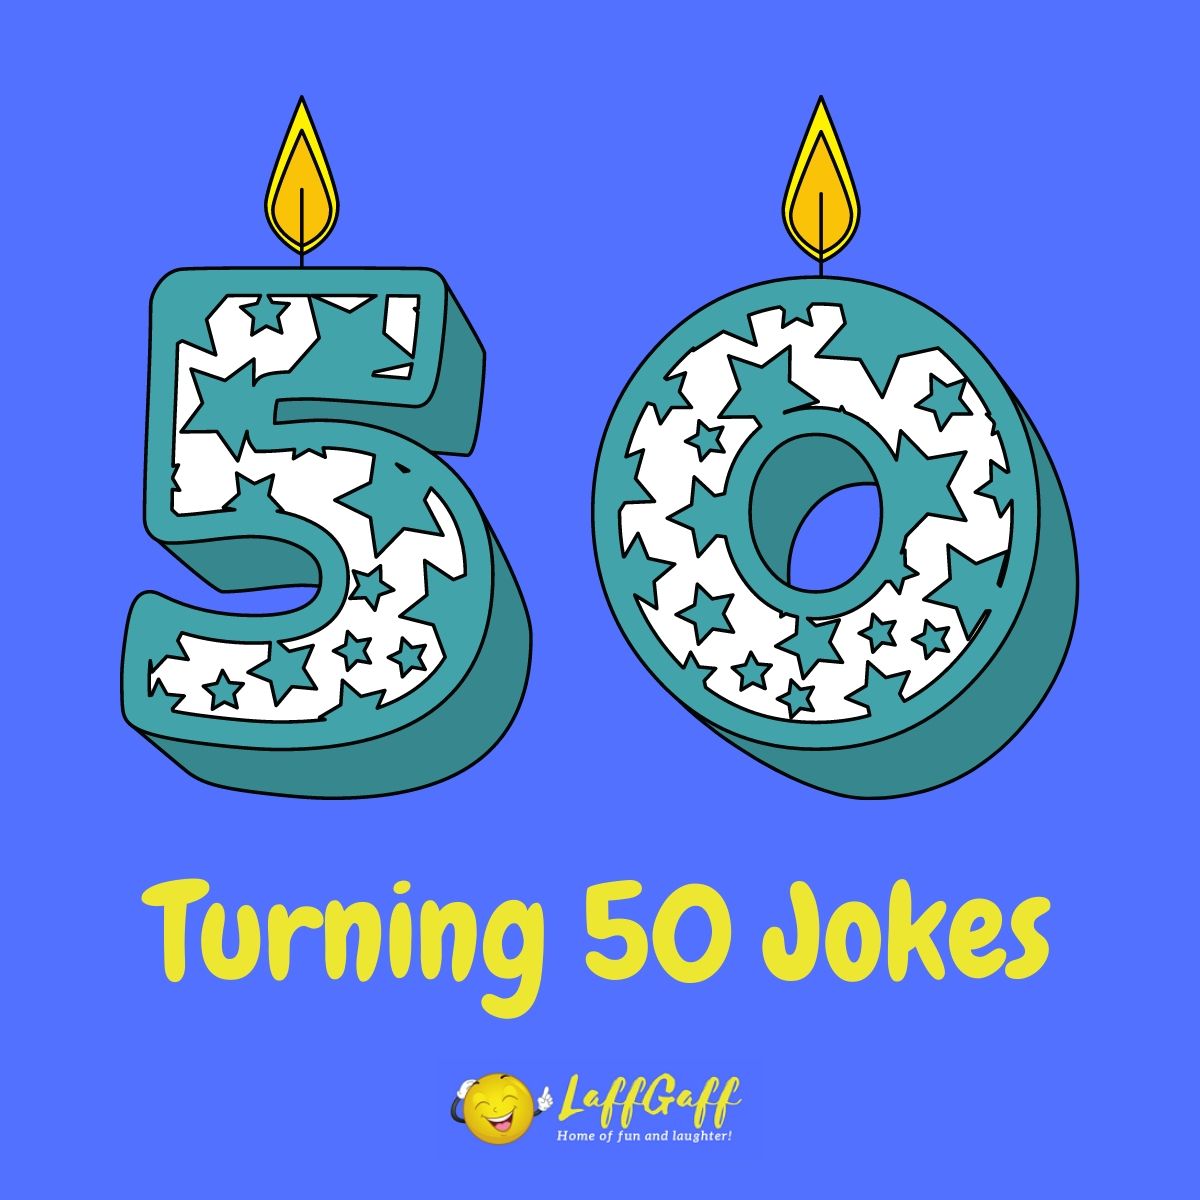 Featured image for a page of turning 50 jokes and sayings.